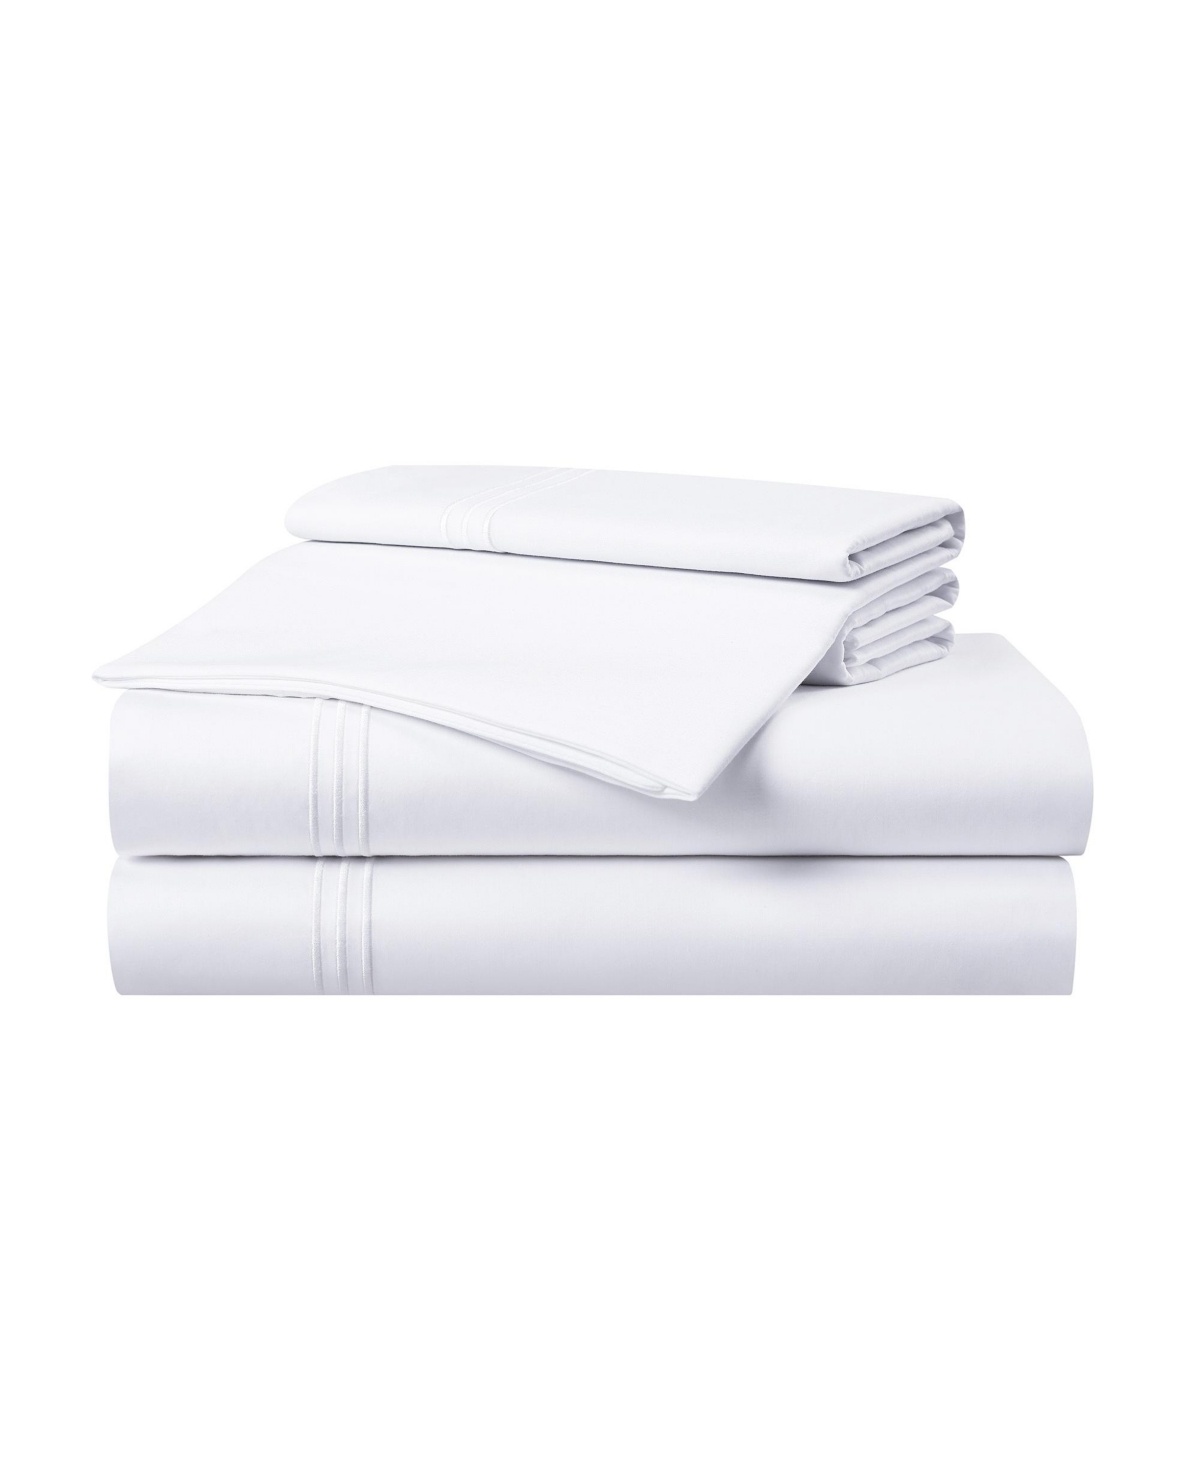 Aston And Arden Sateen Twin Sheet Set, 1 Flat Sheet, 1 Fitted Sheet, 2 Pillowcases, 600 Thread Count, Sateen Cotton, In White